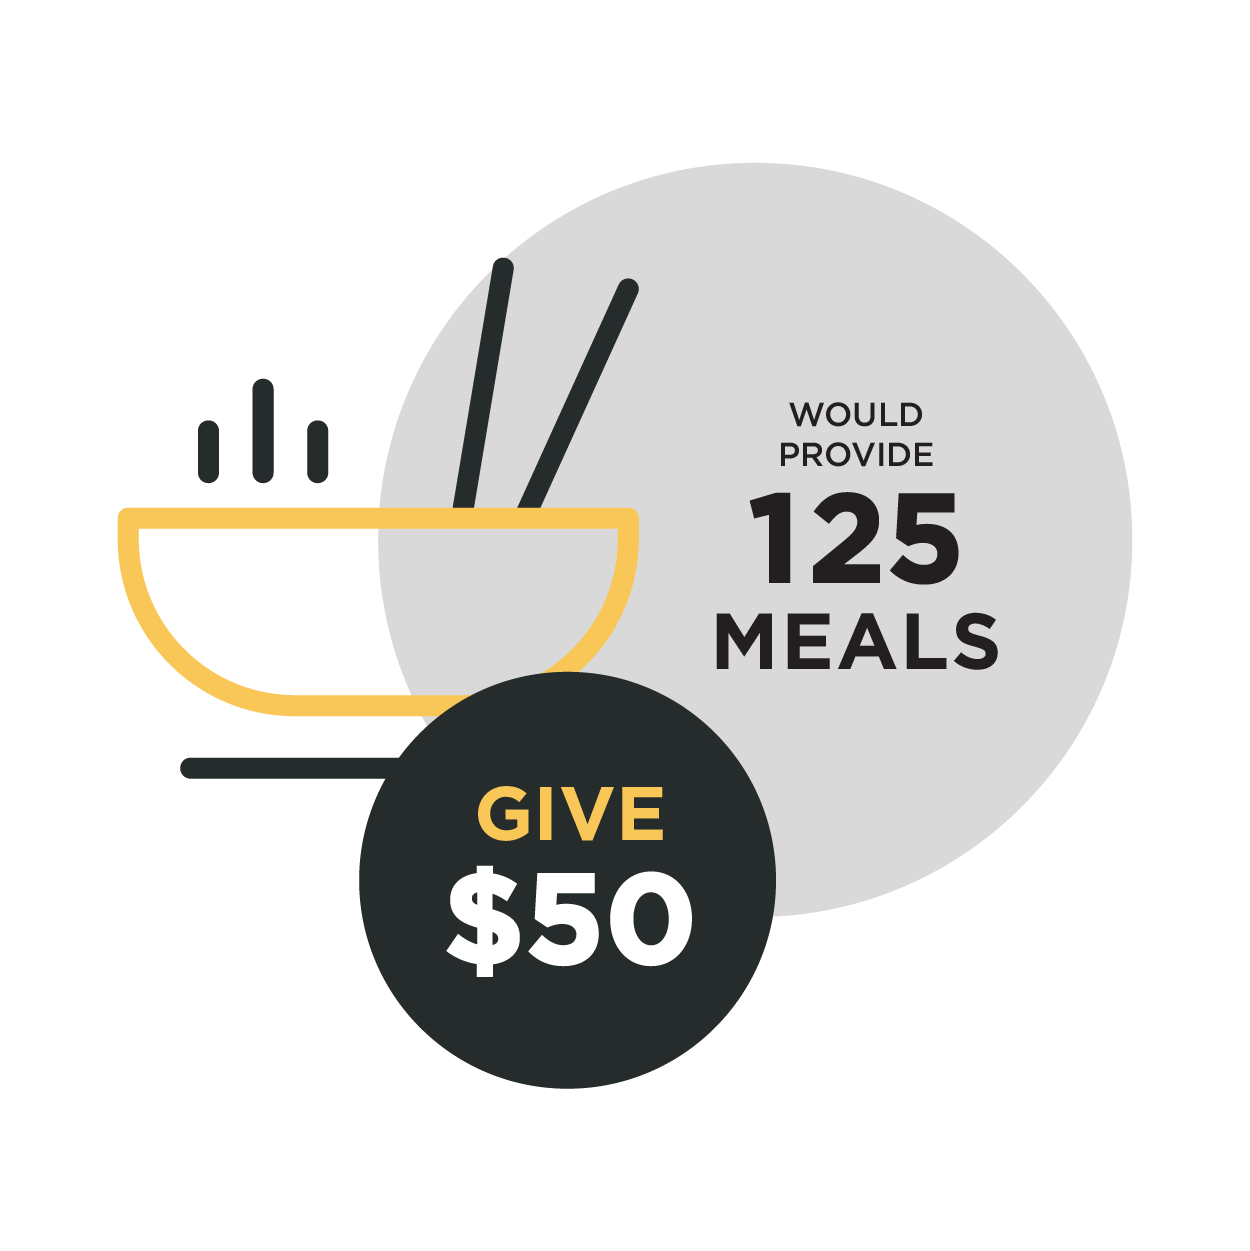 Give $50 will provide 125 meals